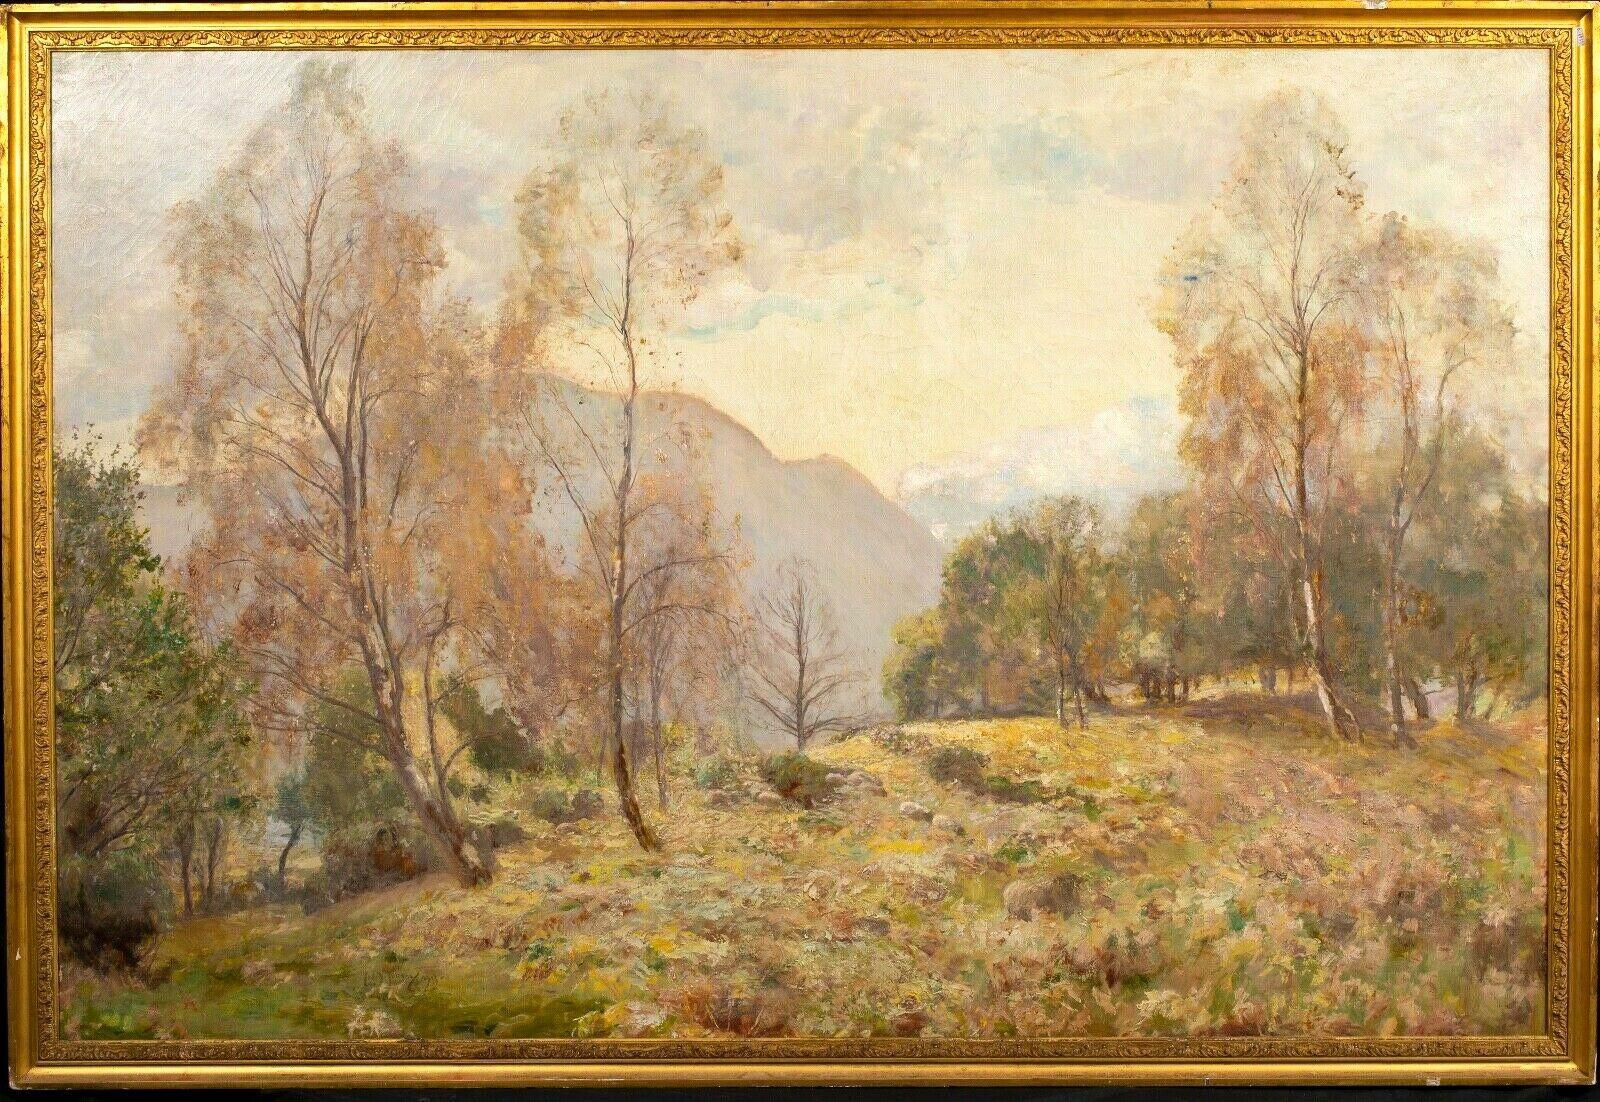 No. 4 The Birk And The Bracken, dated 1913